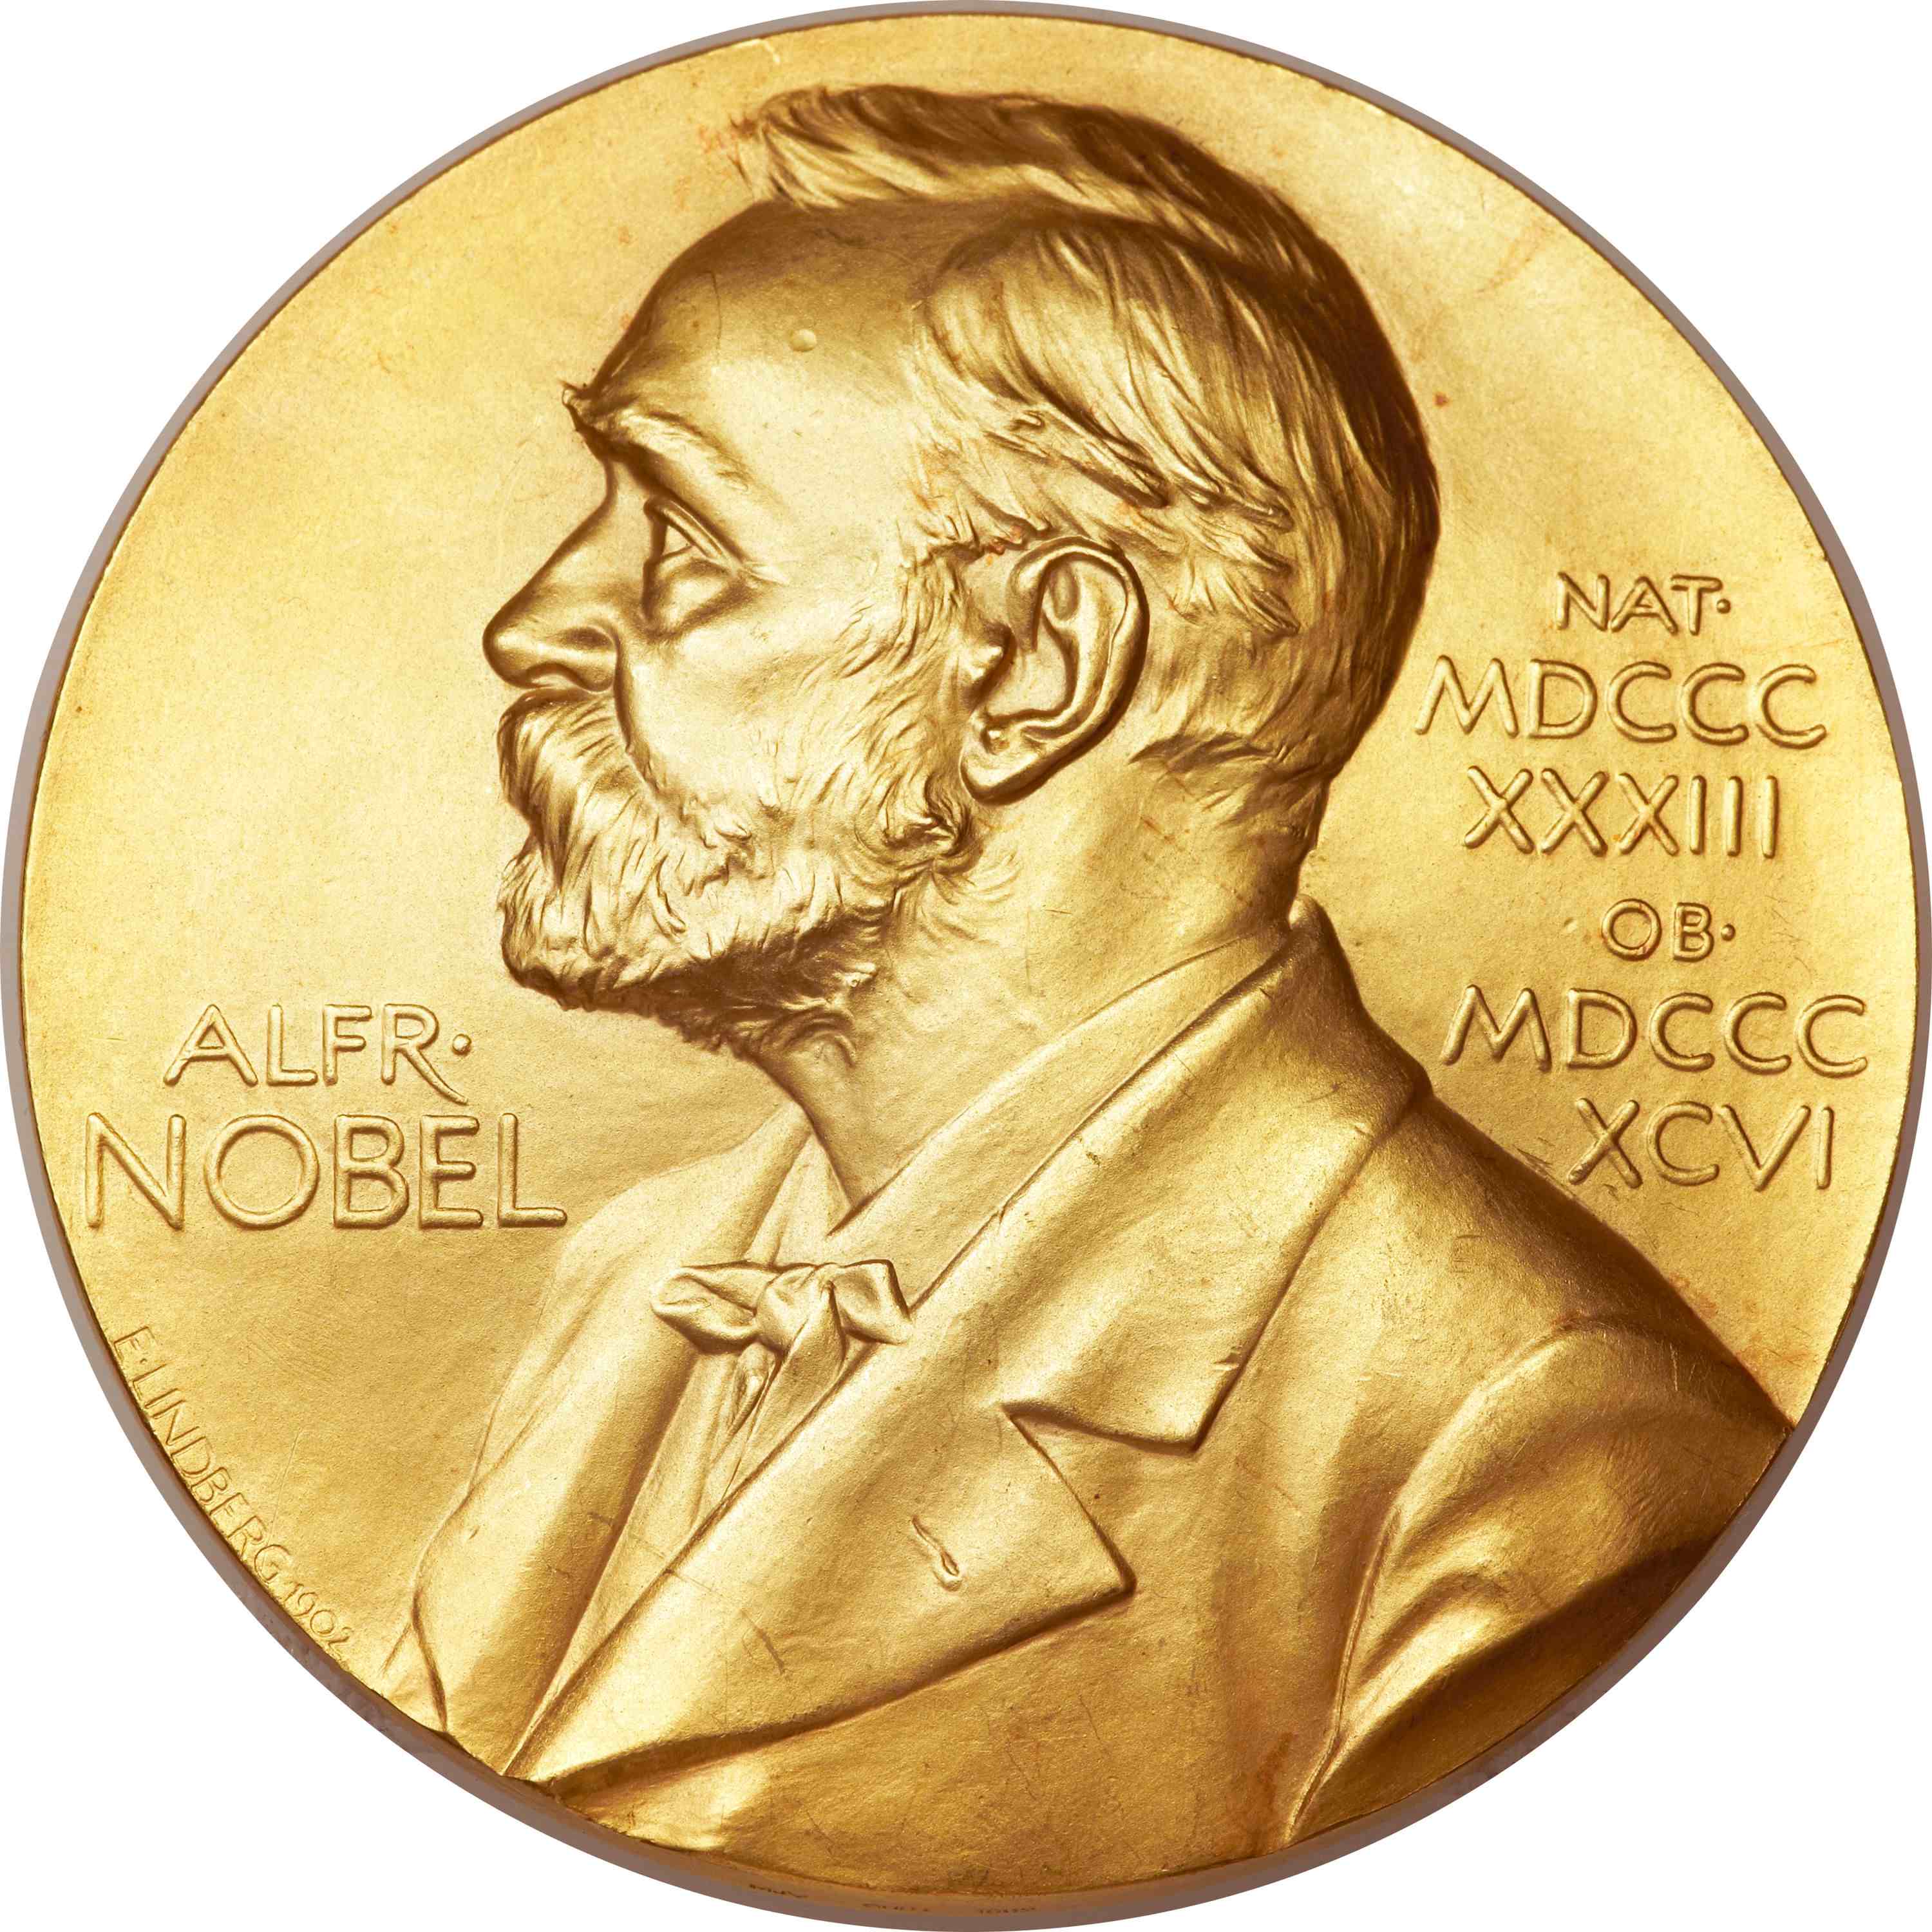 How to Win the Nobel Prize